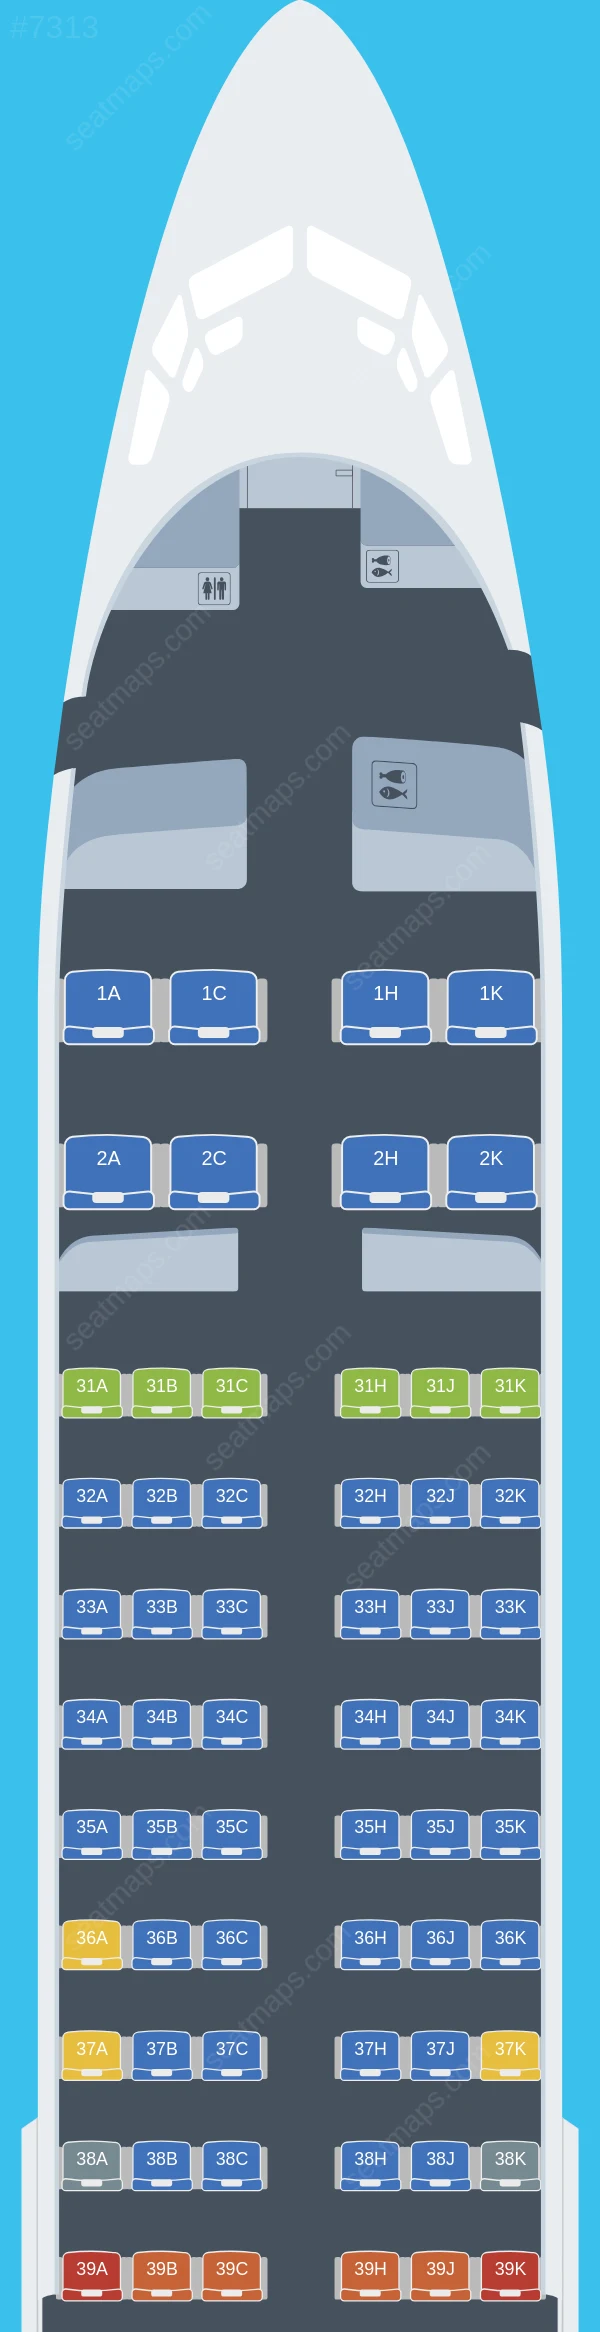 Hainan Airlines Boeing 737-800 seatmap preview